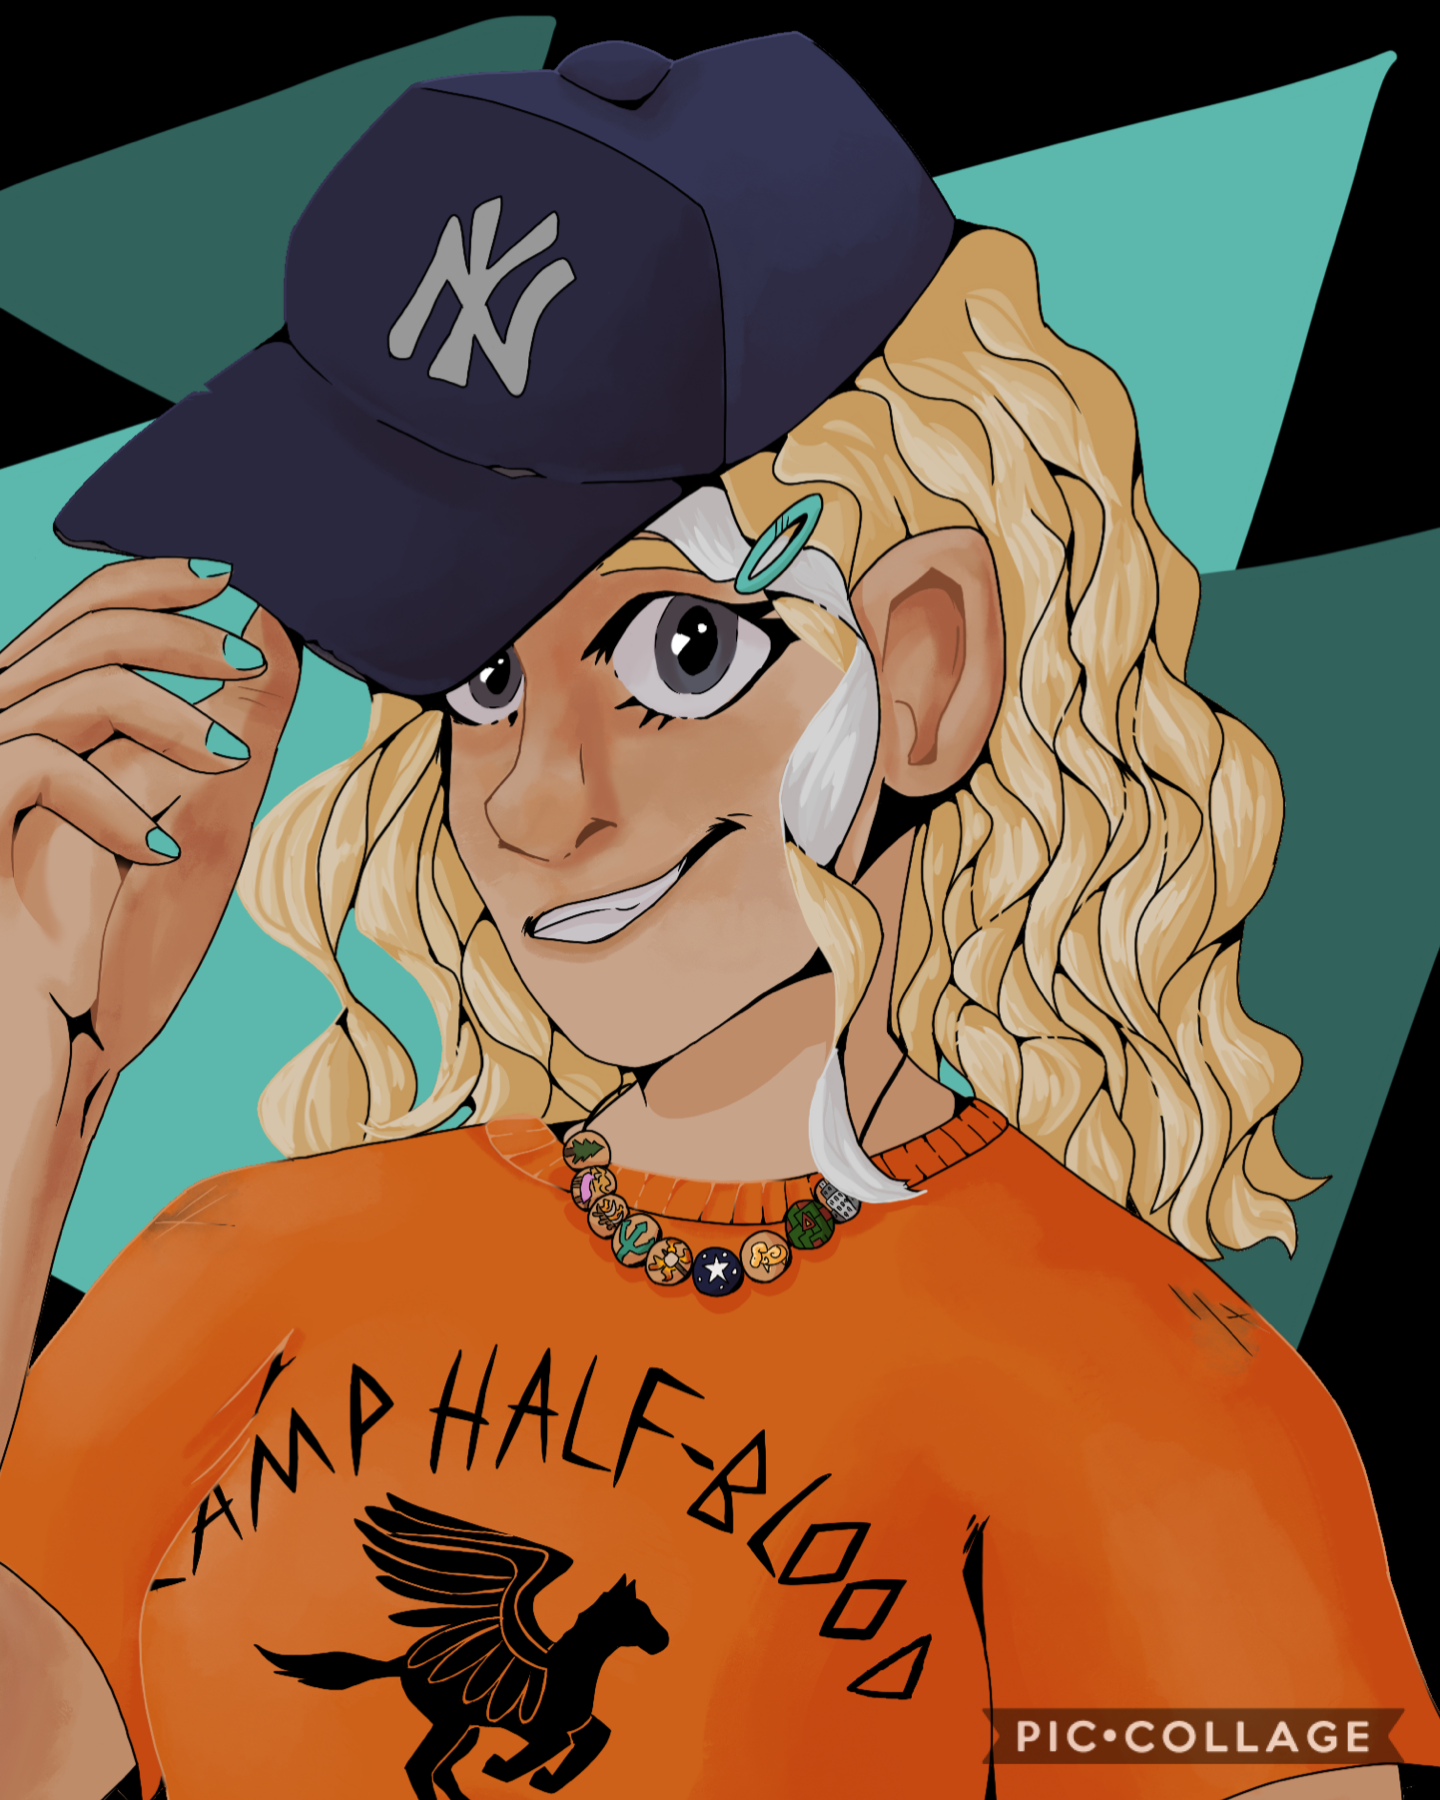 So Um I’ve been really really into Percy Jackson lately, so I drew Annabeth using my iPad, she’s like one of my favorite characters a lot of the characters are so amazing I can’t decide who is my fav.